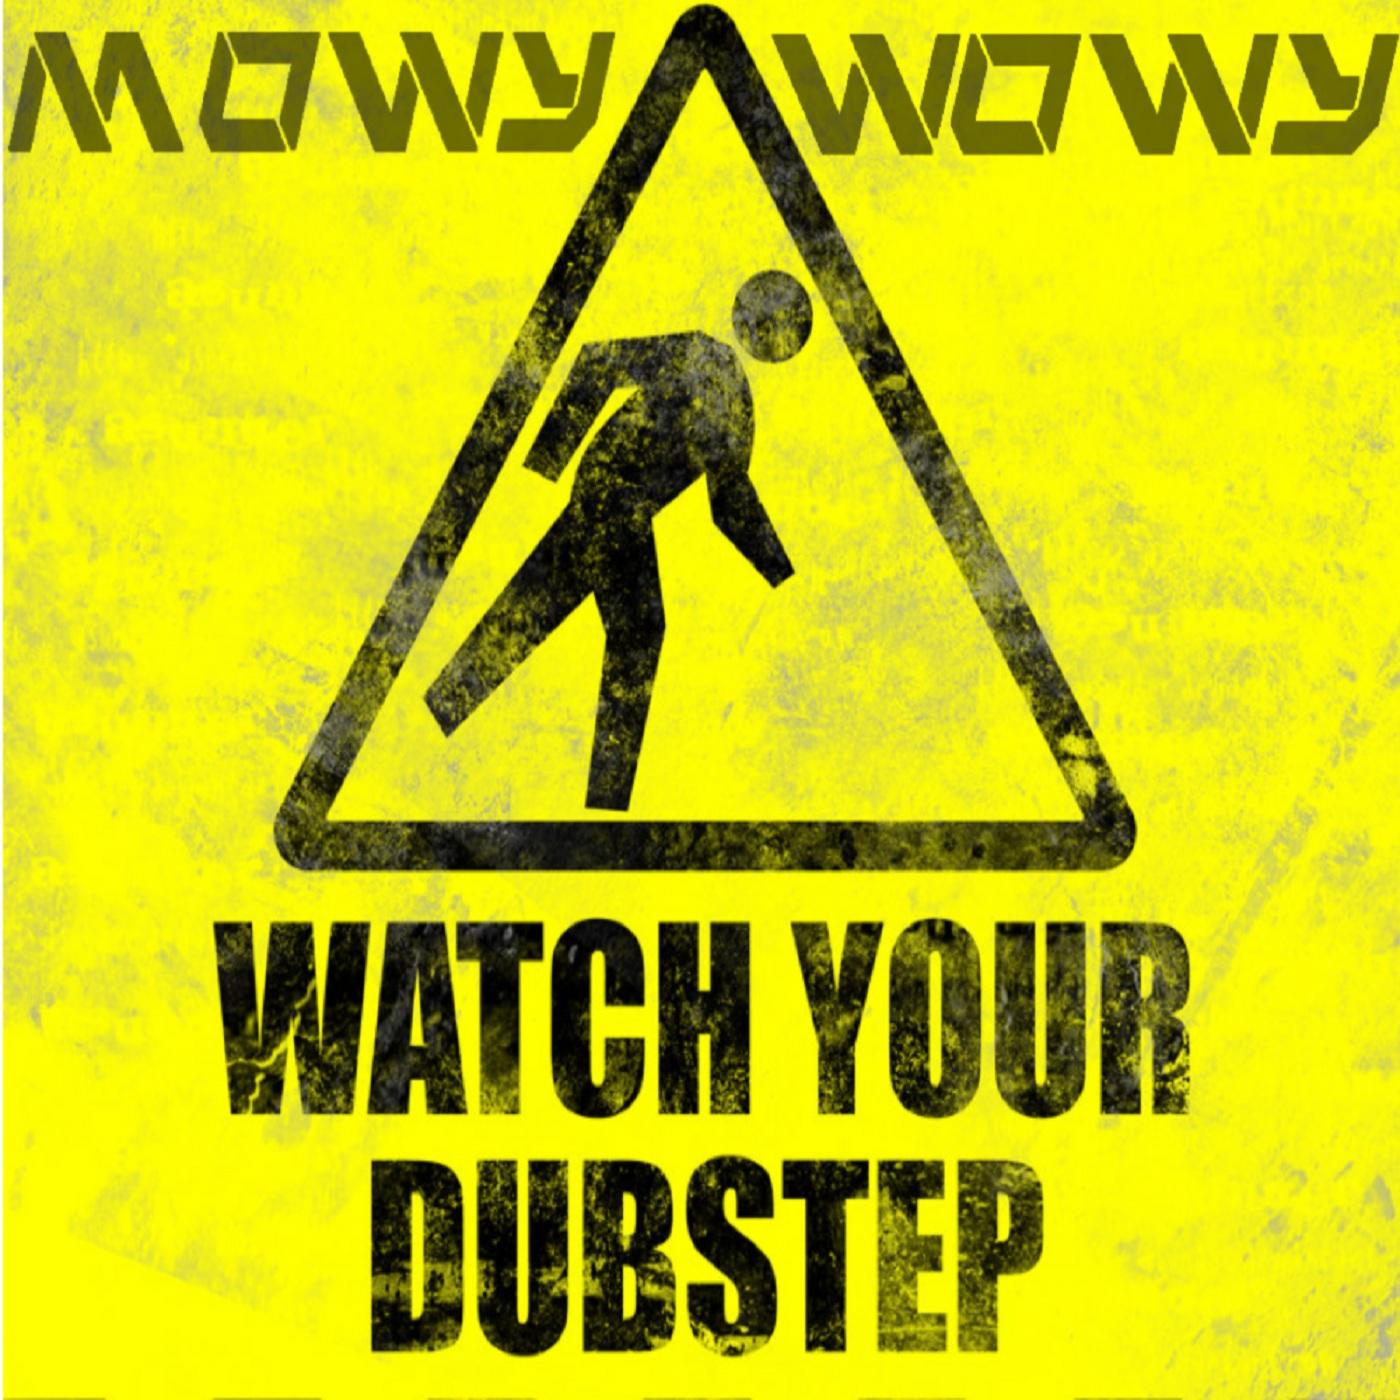 Watch Your Dubstep EP